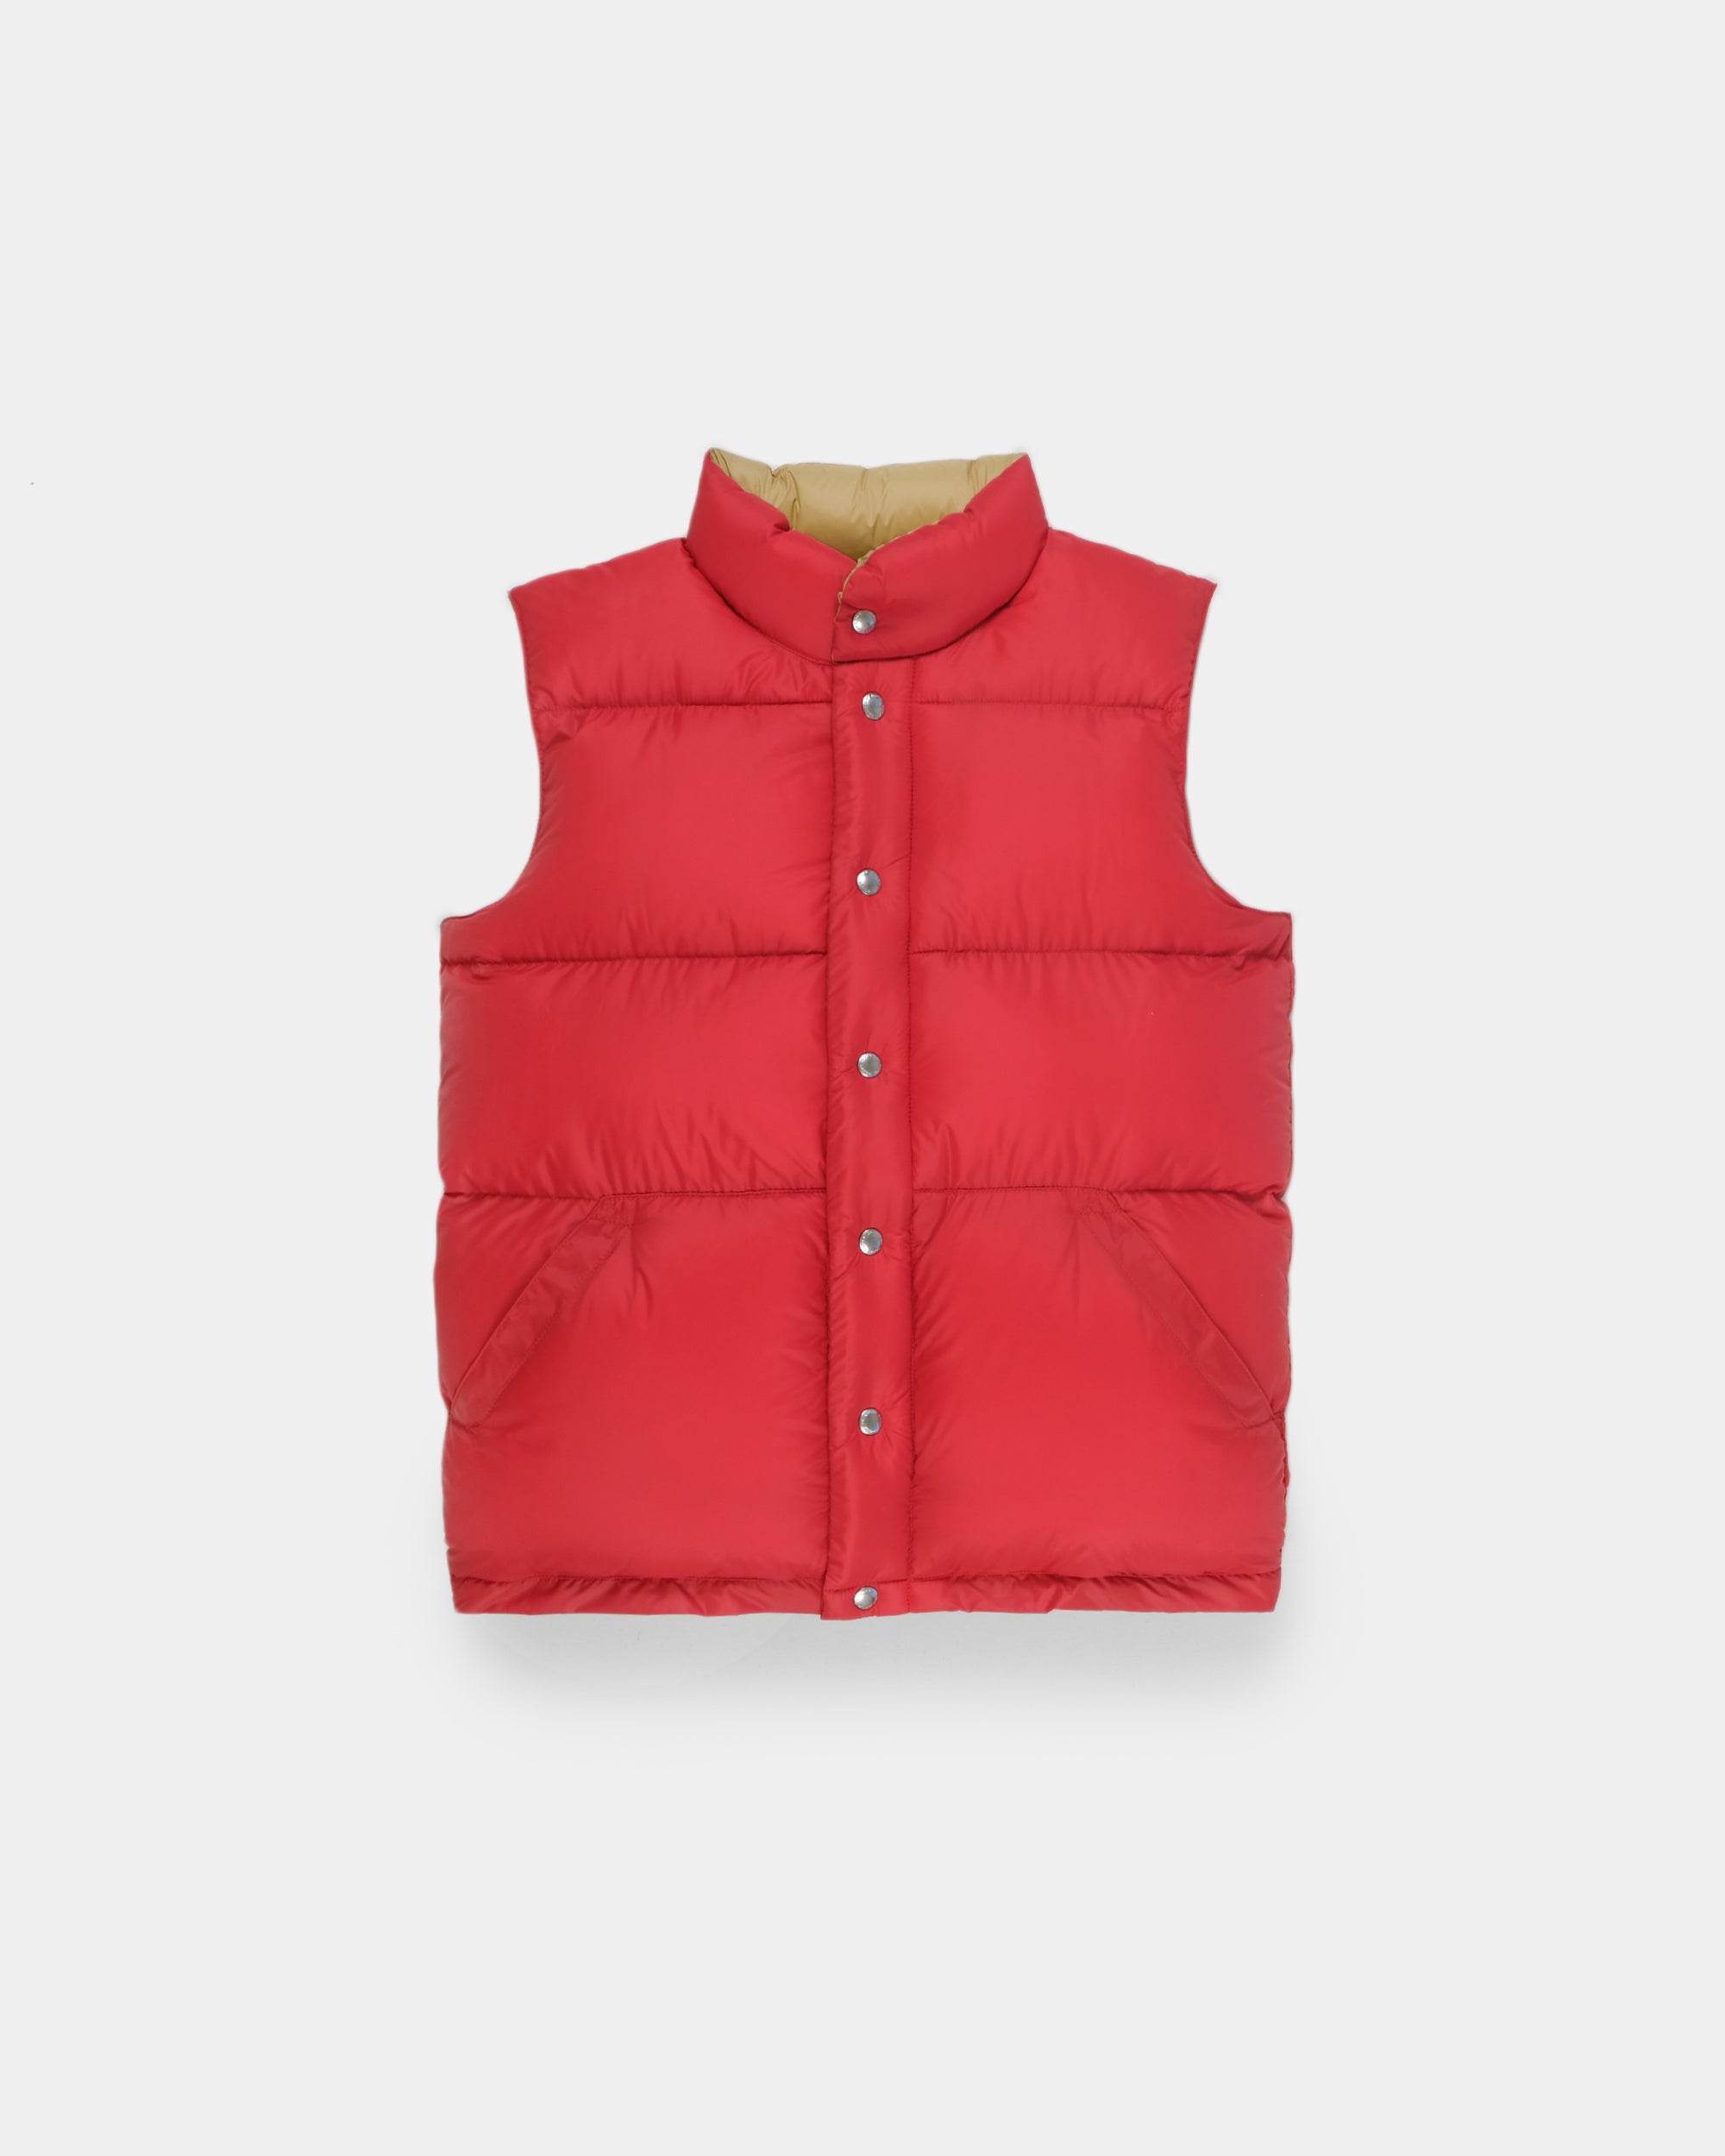 Crescent Down Works | High-Quality Down Jackets, Vests, & Accessories